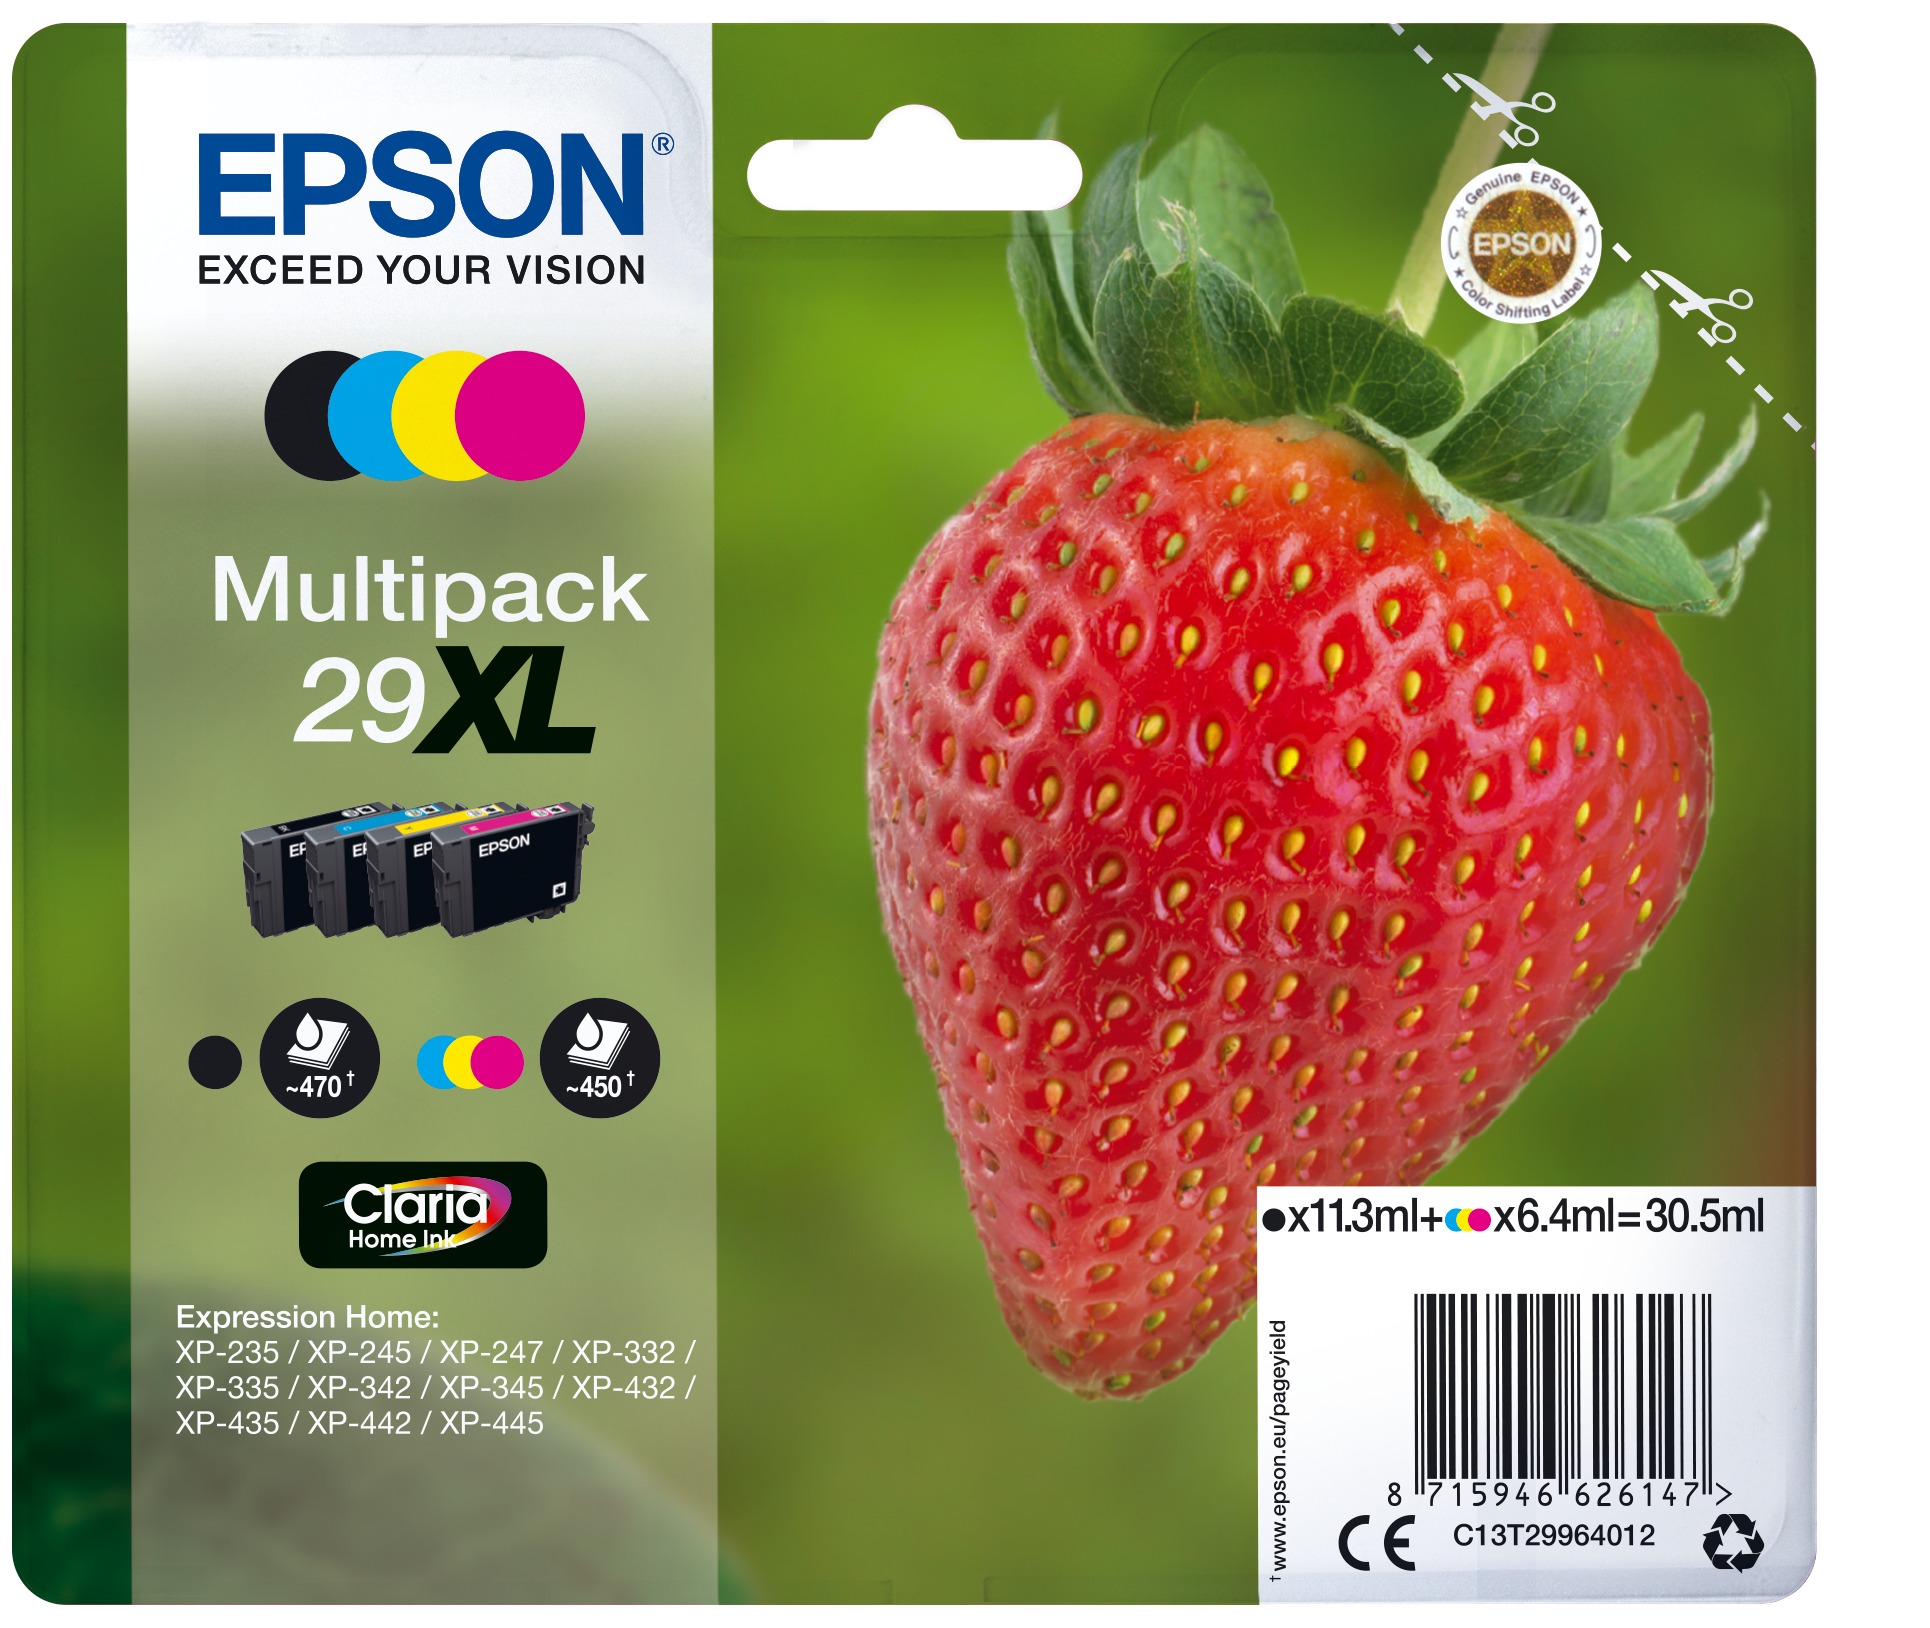 Ontmoedigen Uitstekend Inzet 29XL Strawberry Claria Home Multipack 4-colours Ink | Ink Consumables | Ink  & Paper | Products | Epson United Kingdom